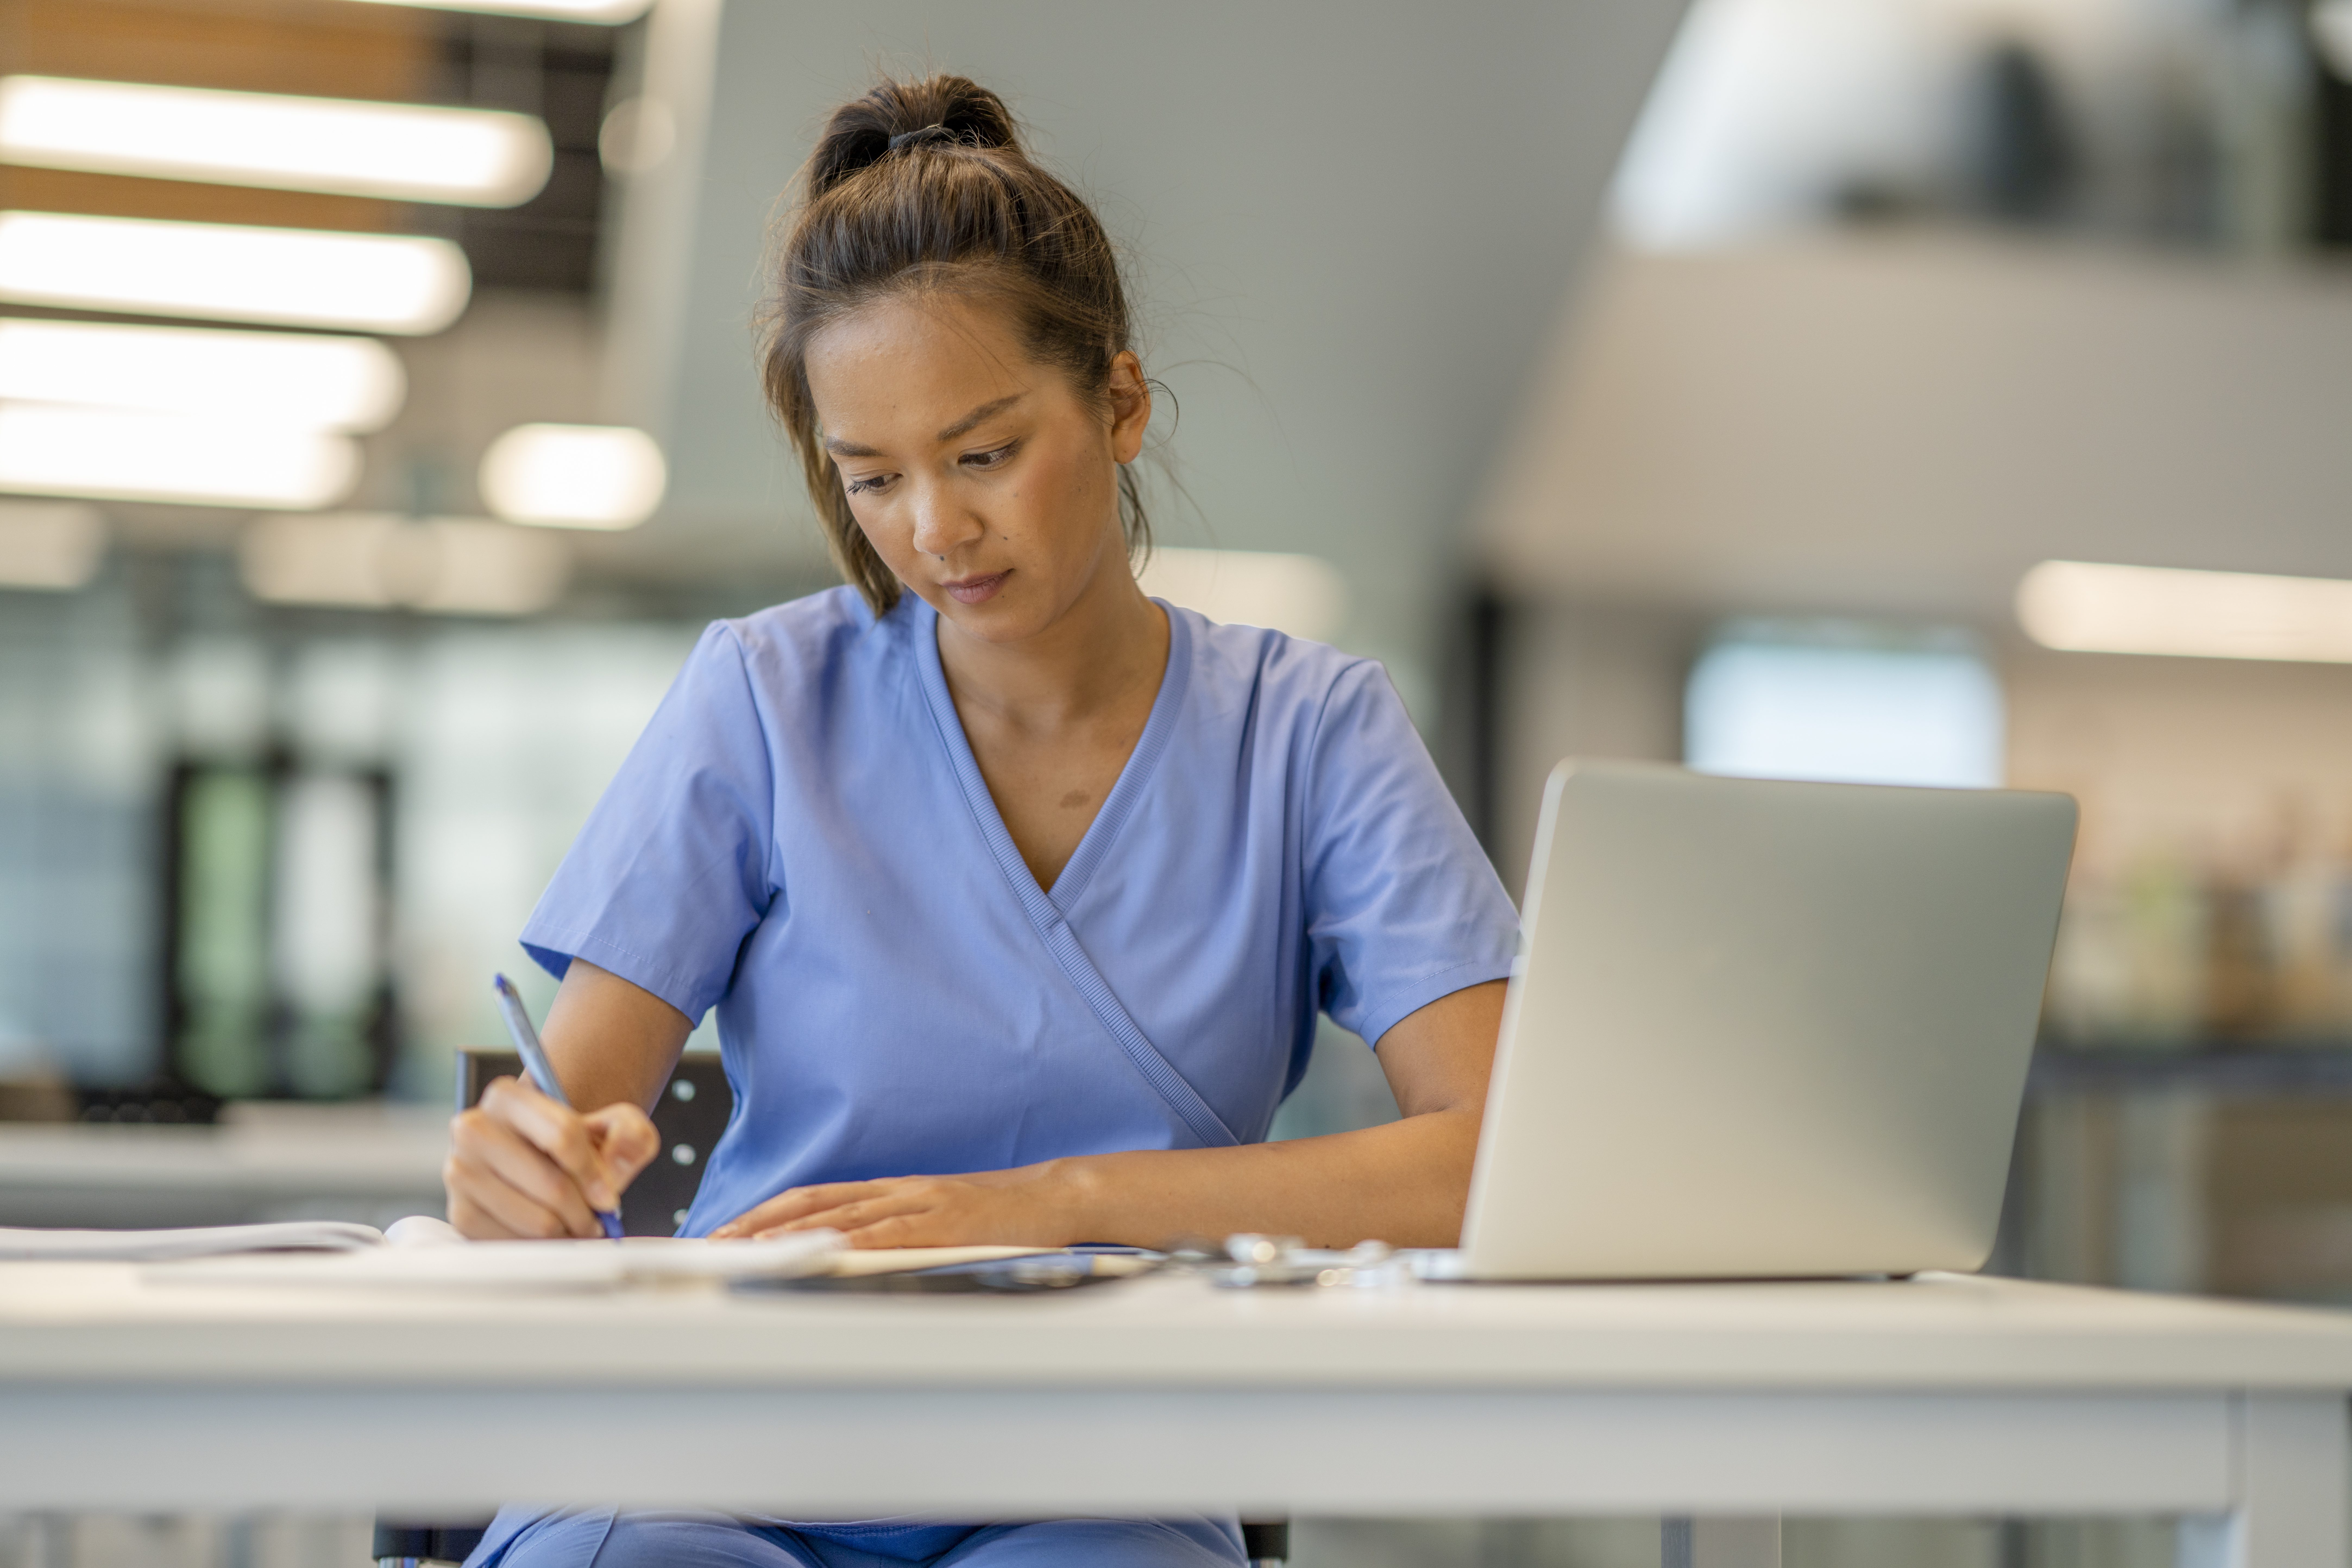 A woman wearing scrubs diligently studies at a desk in a modern educational building.